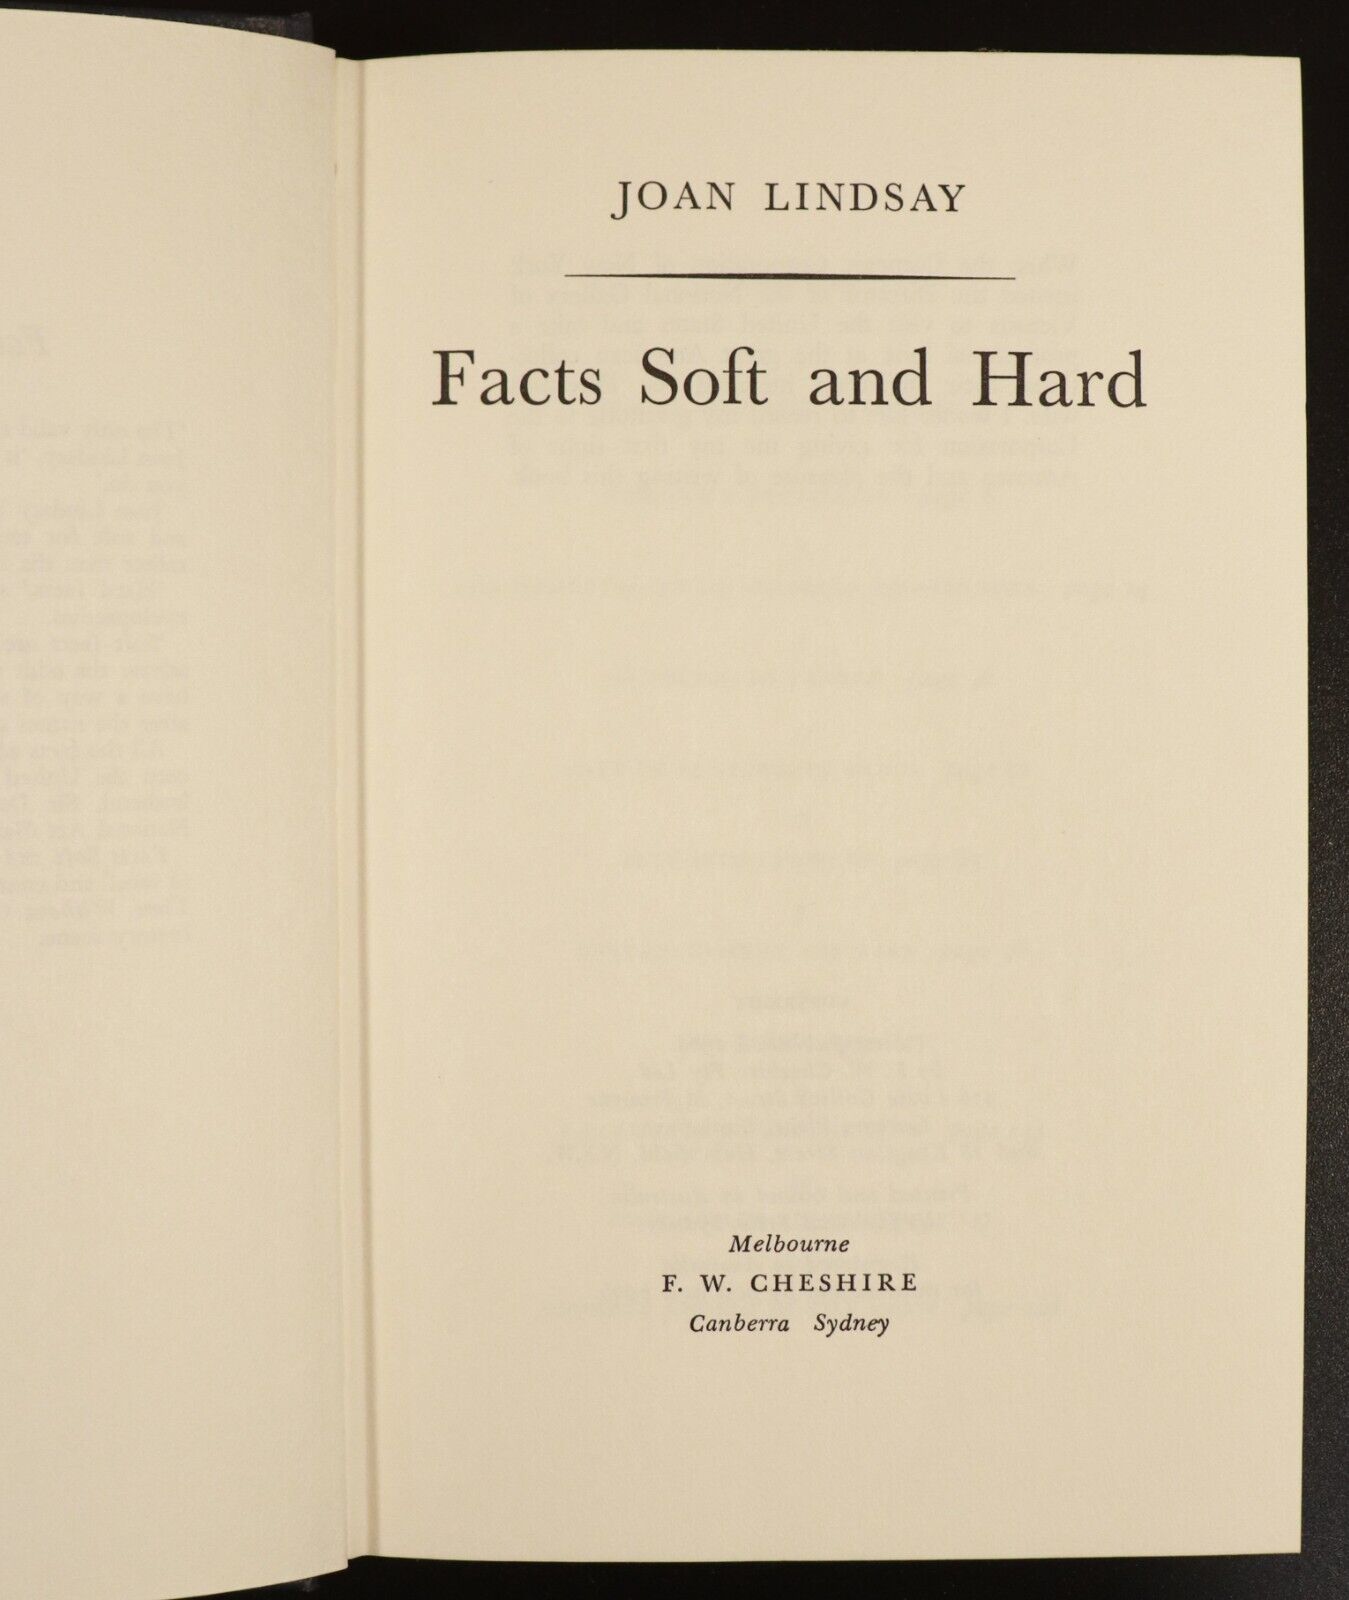 1964 Facts Soft And Hard by Joan Lindsay Australian Art Travel History Book